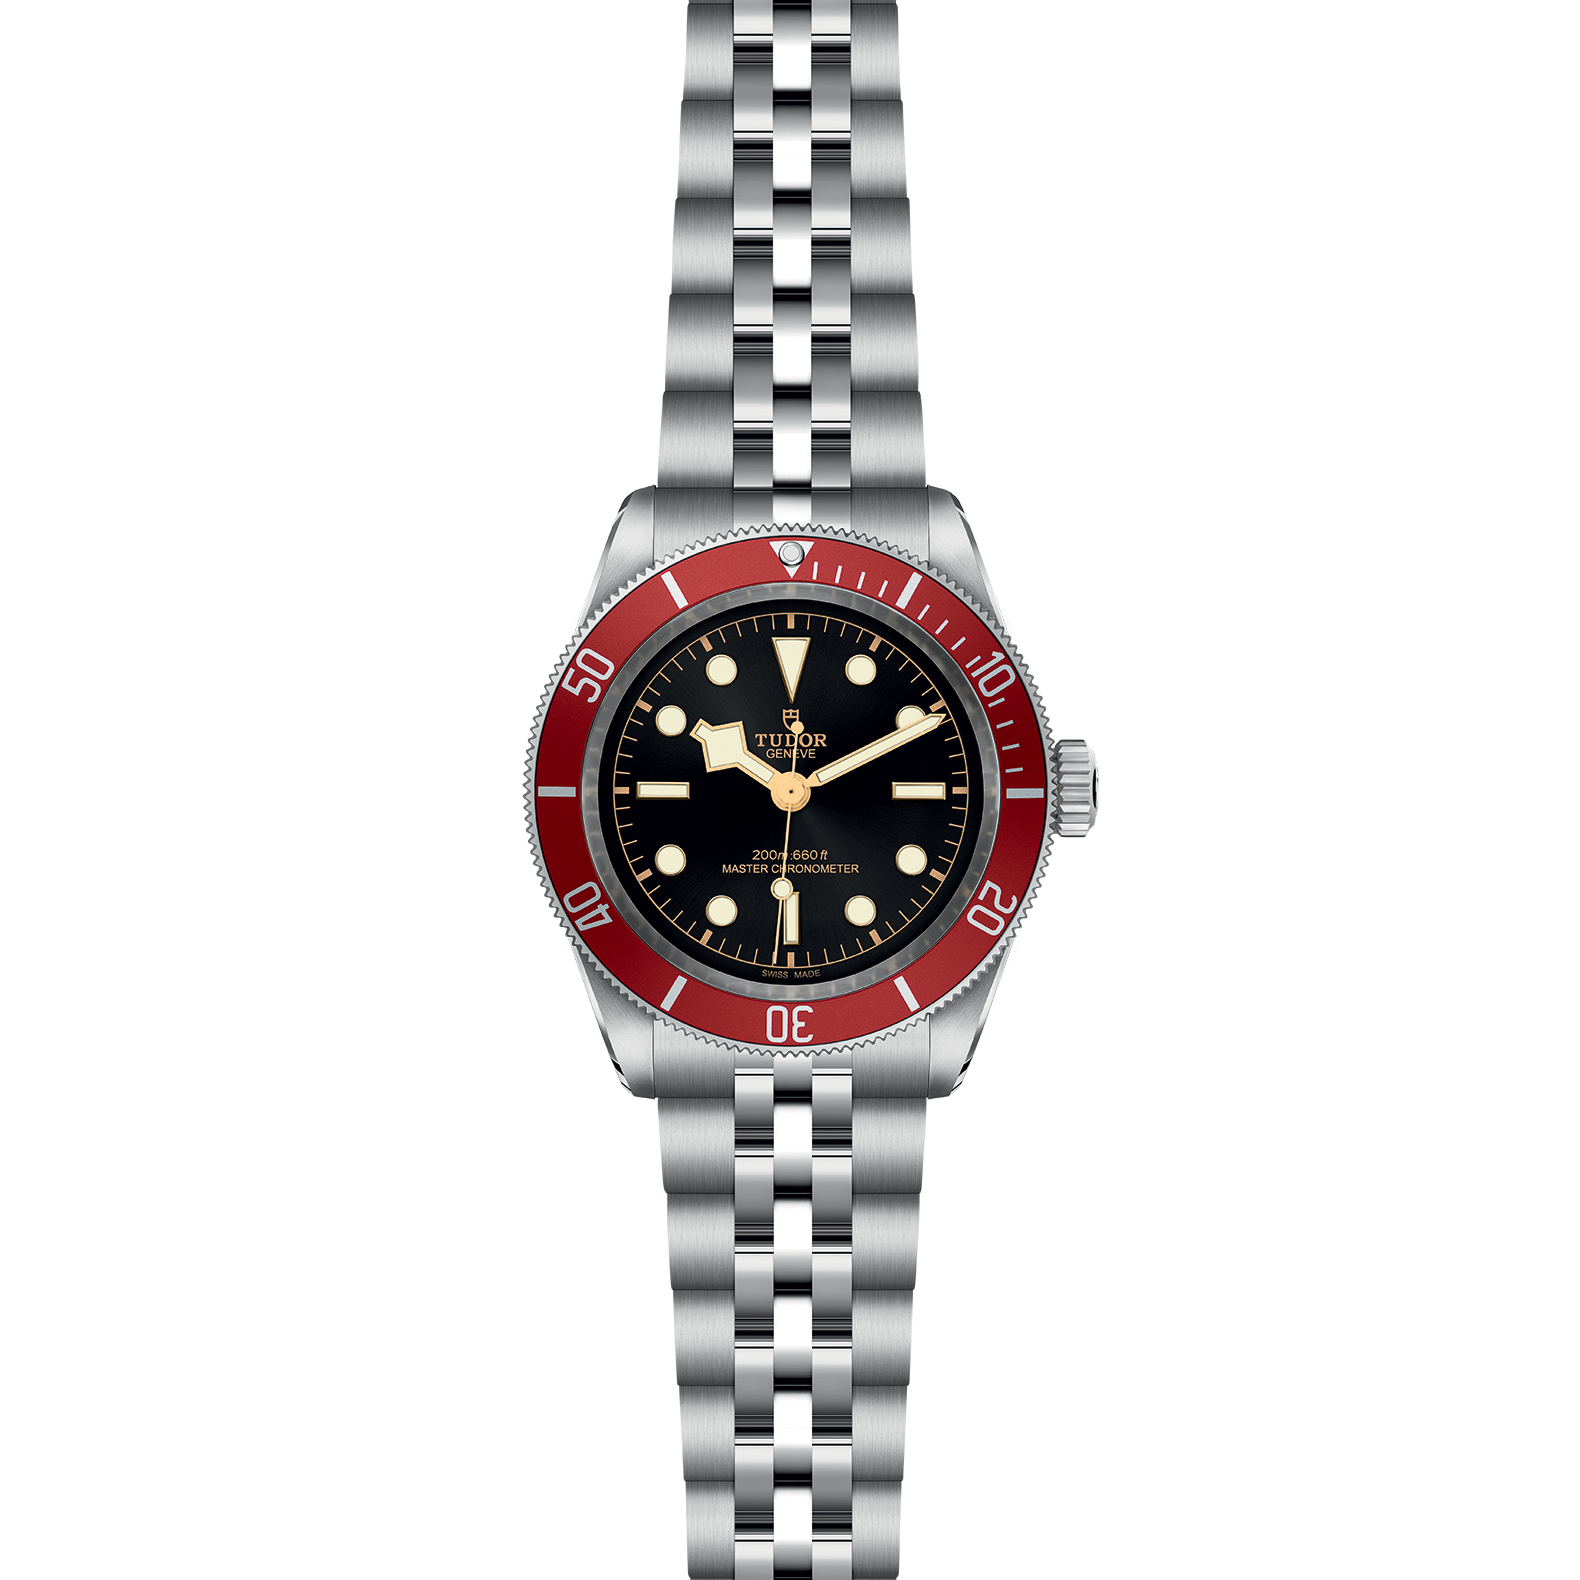 TUDOR Black Bay with 41mm Steel Case and Steel Bracelet M7941A1A0RU-0003 Watch Front Facing